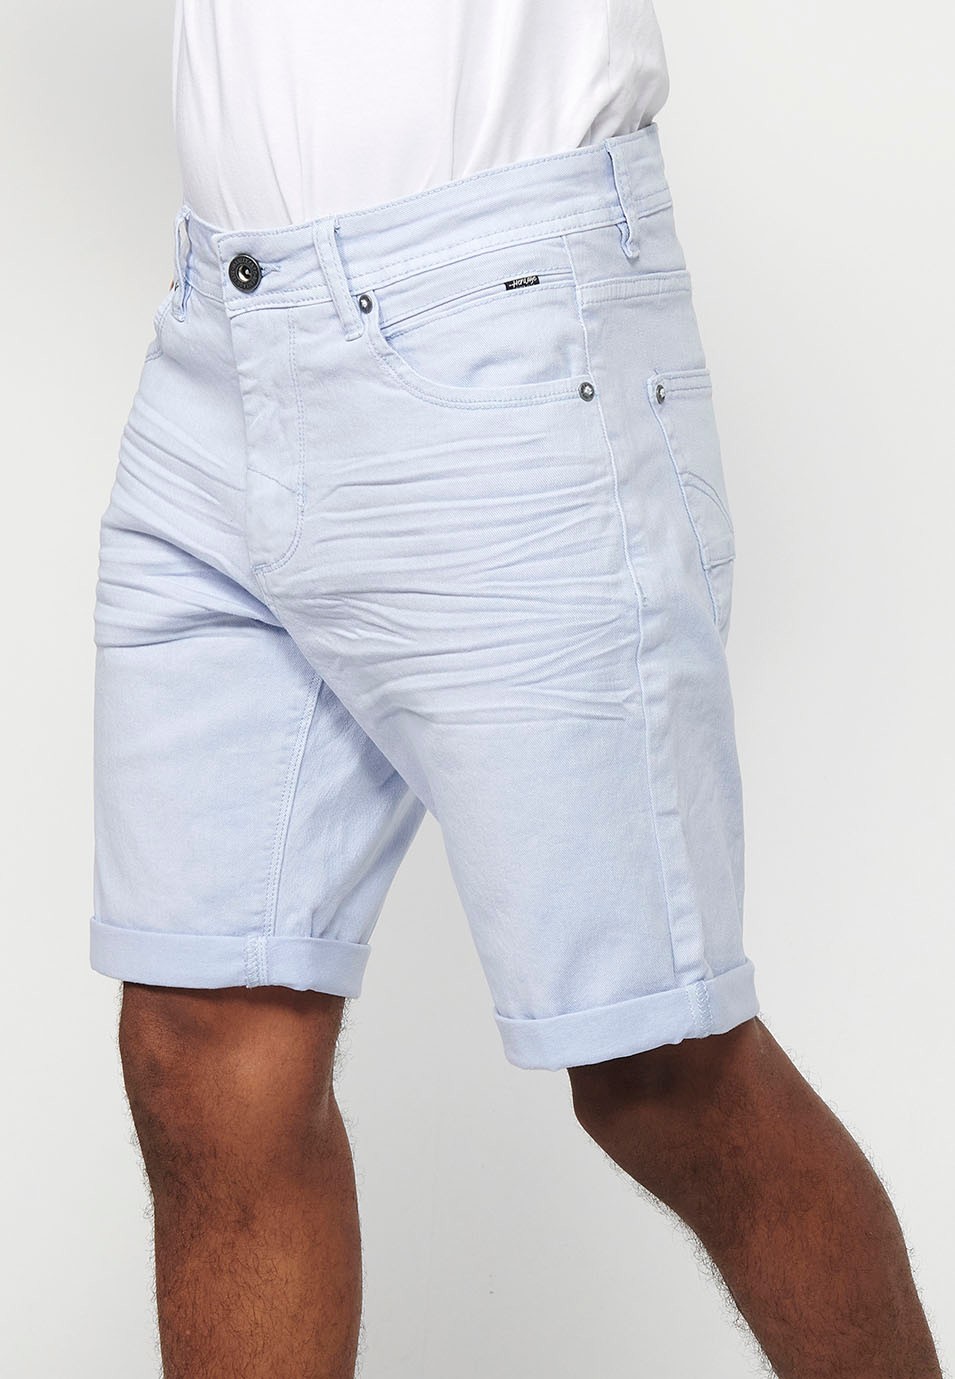 Denim Bermuda shorts with cuffed finish and front zipper and button closure. Five pockets, one blue color pocket for men 1